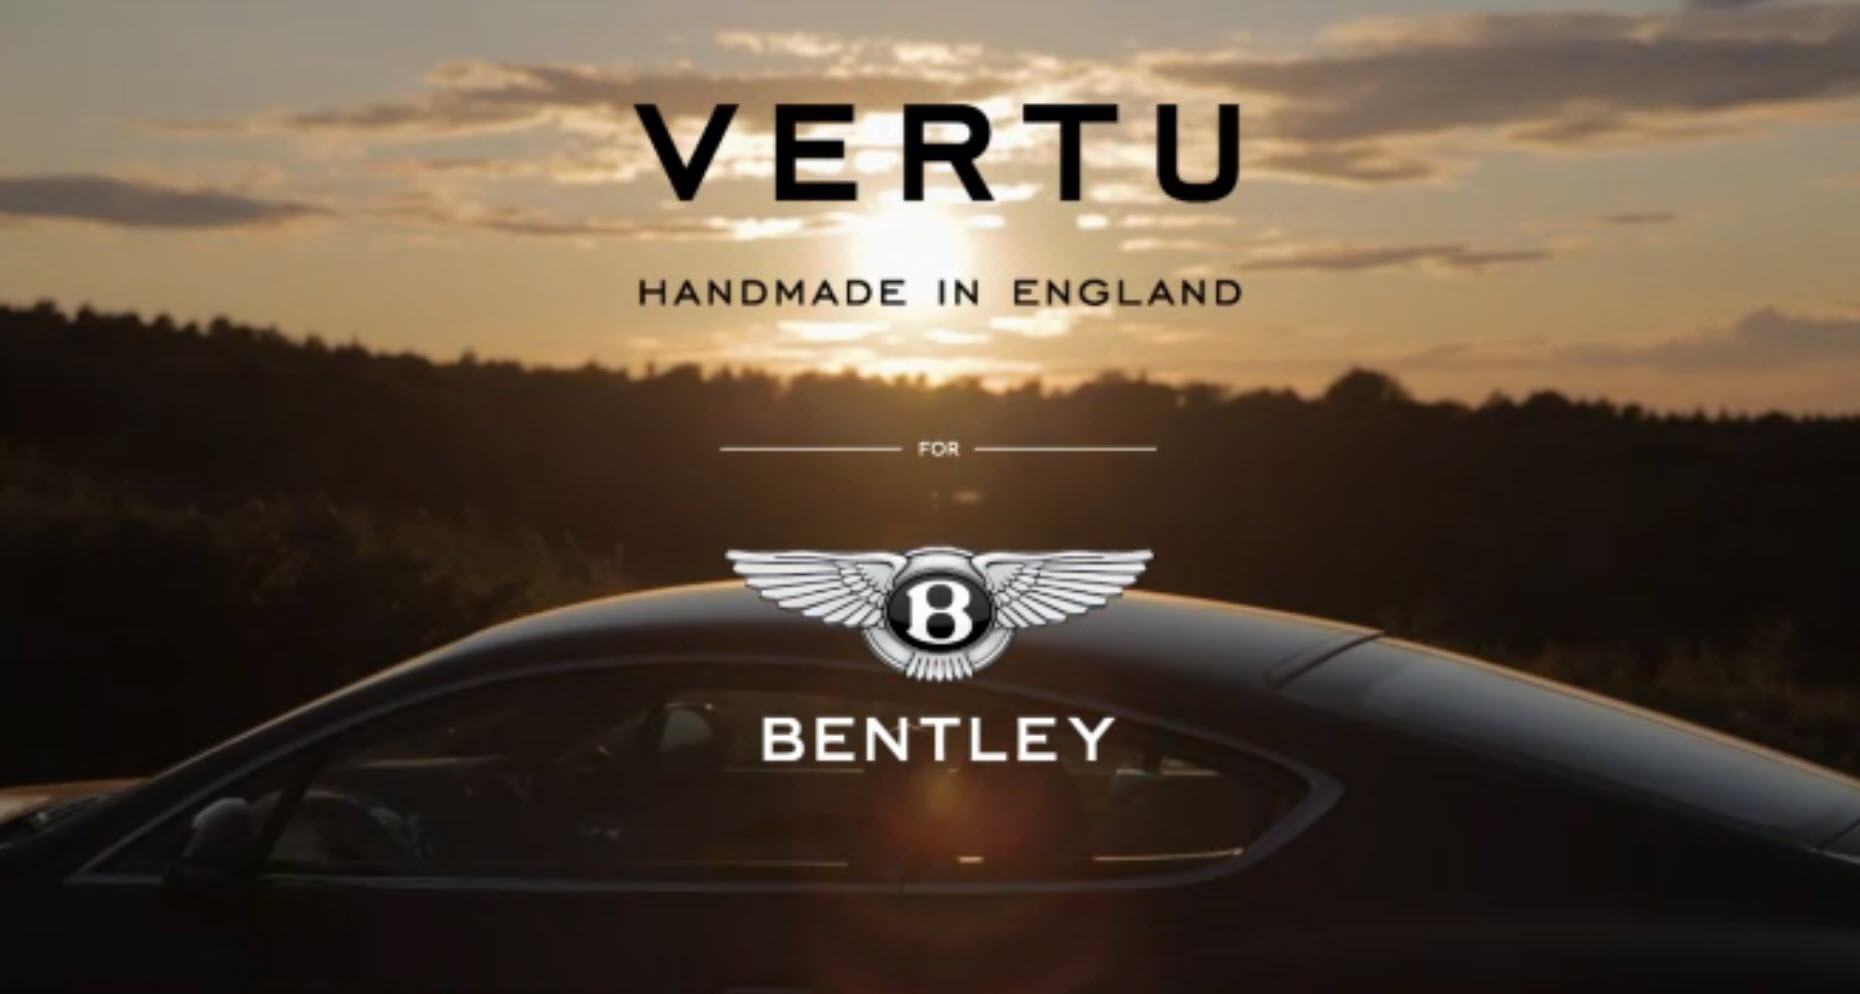 Bentley and Vertu Team Up For Special Edition Smartphone